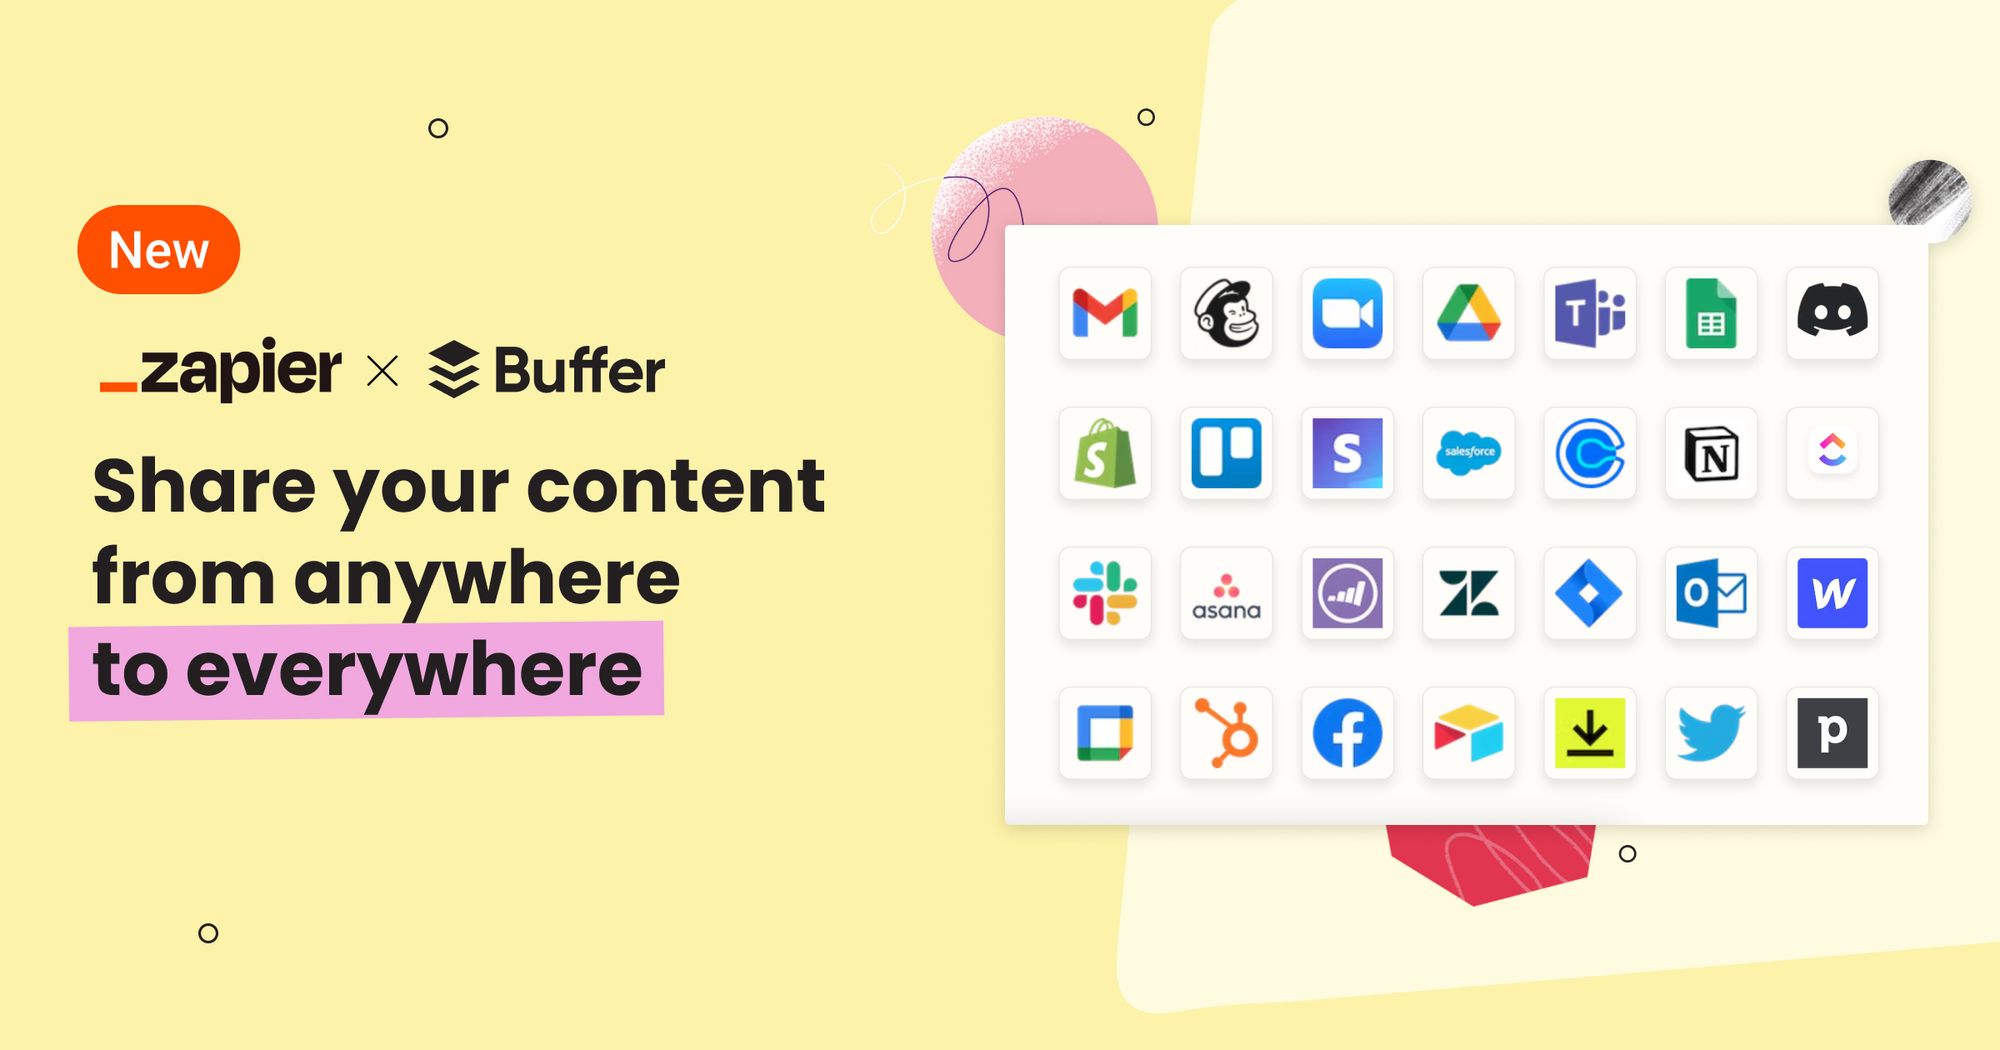 Share your content from anywhere to everywhere with Buffer and Zapier.